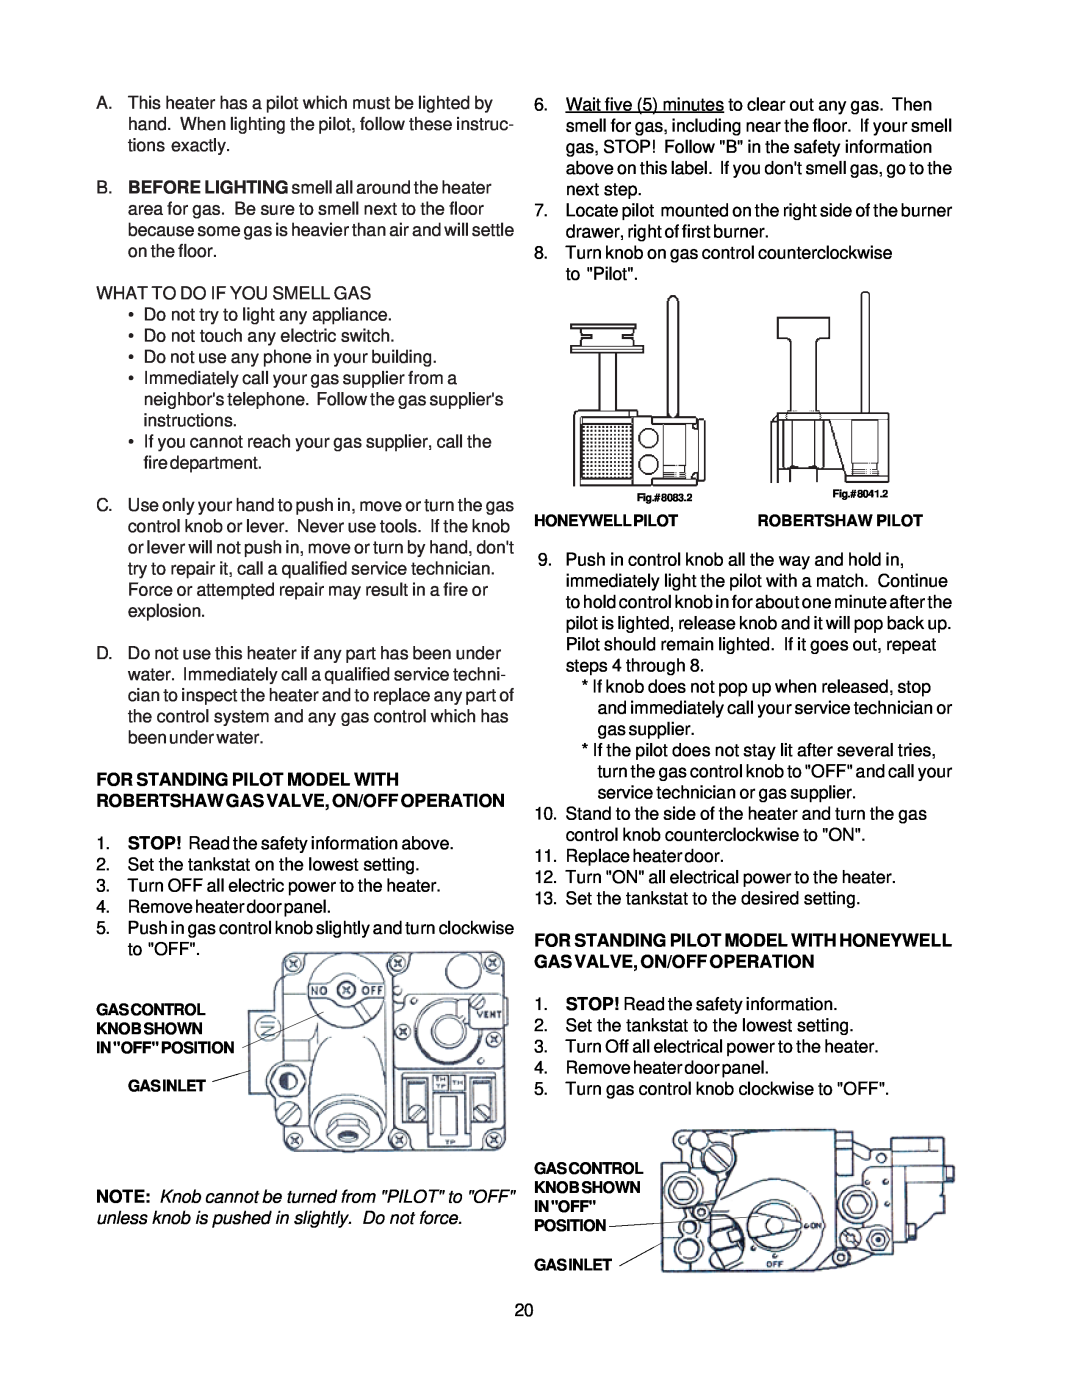 Raypak 260-401 manual STOP! Read the safety information above 